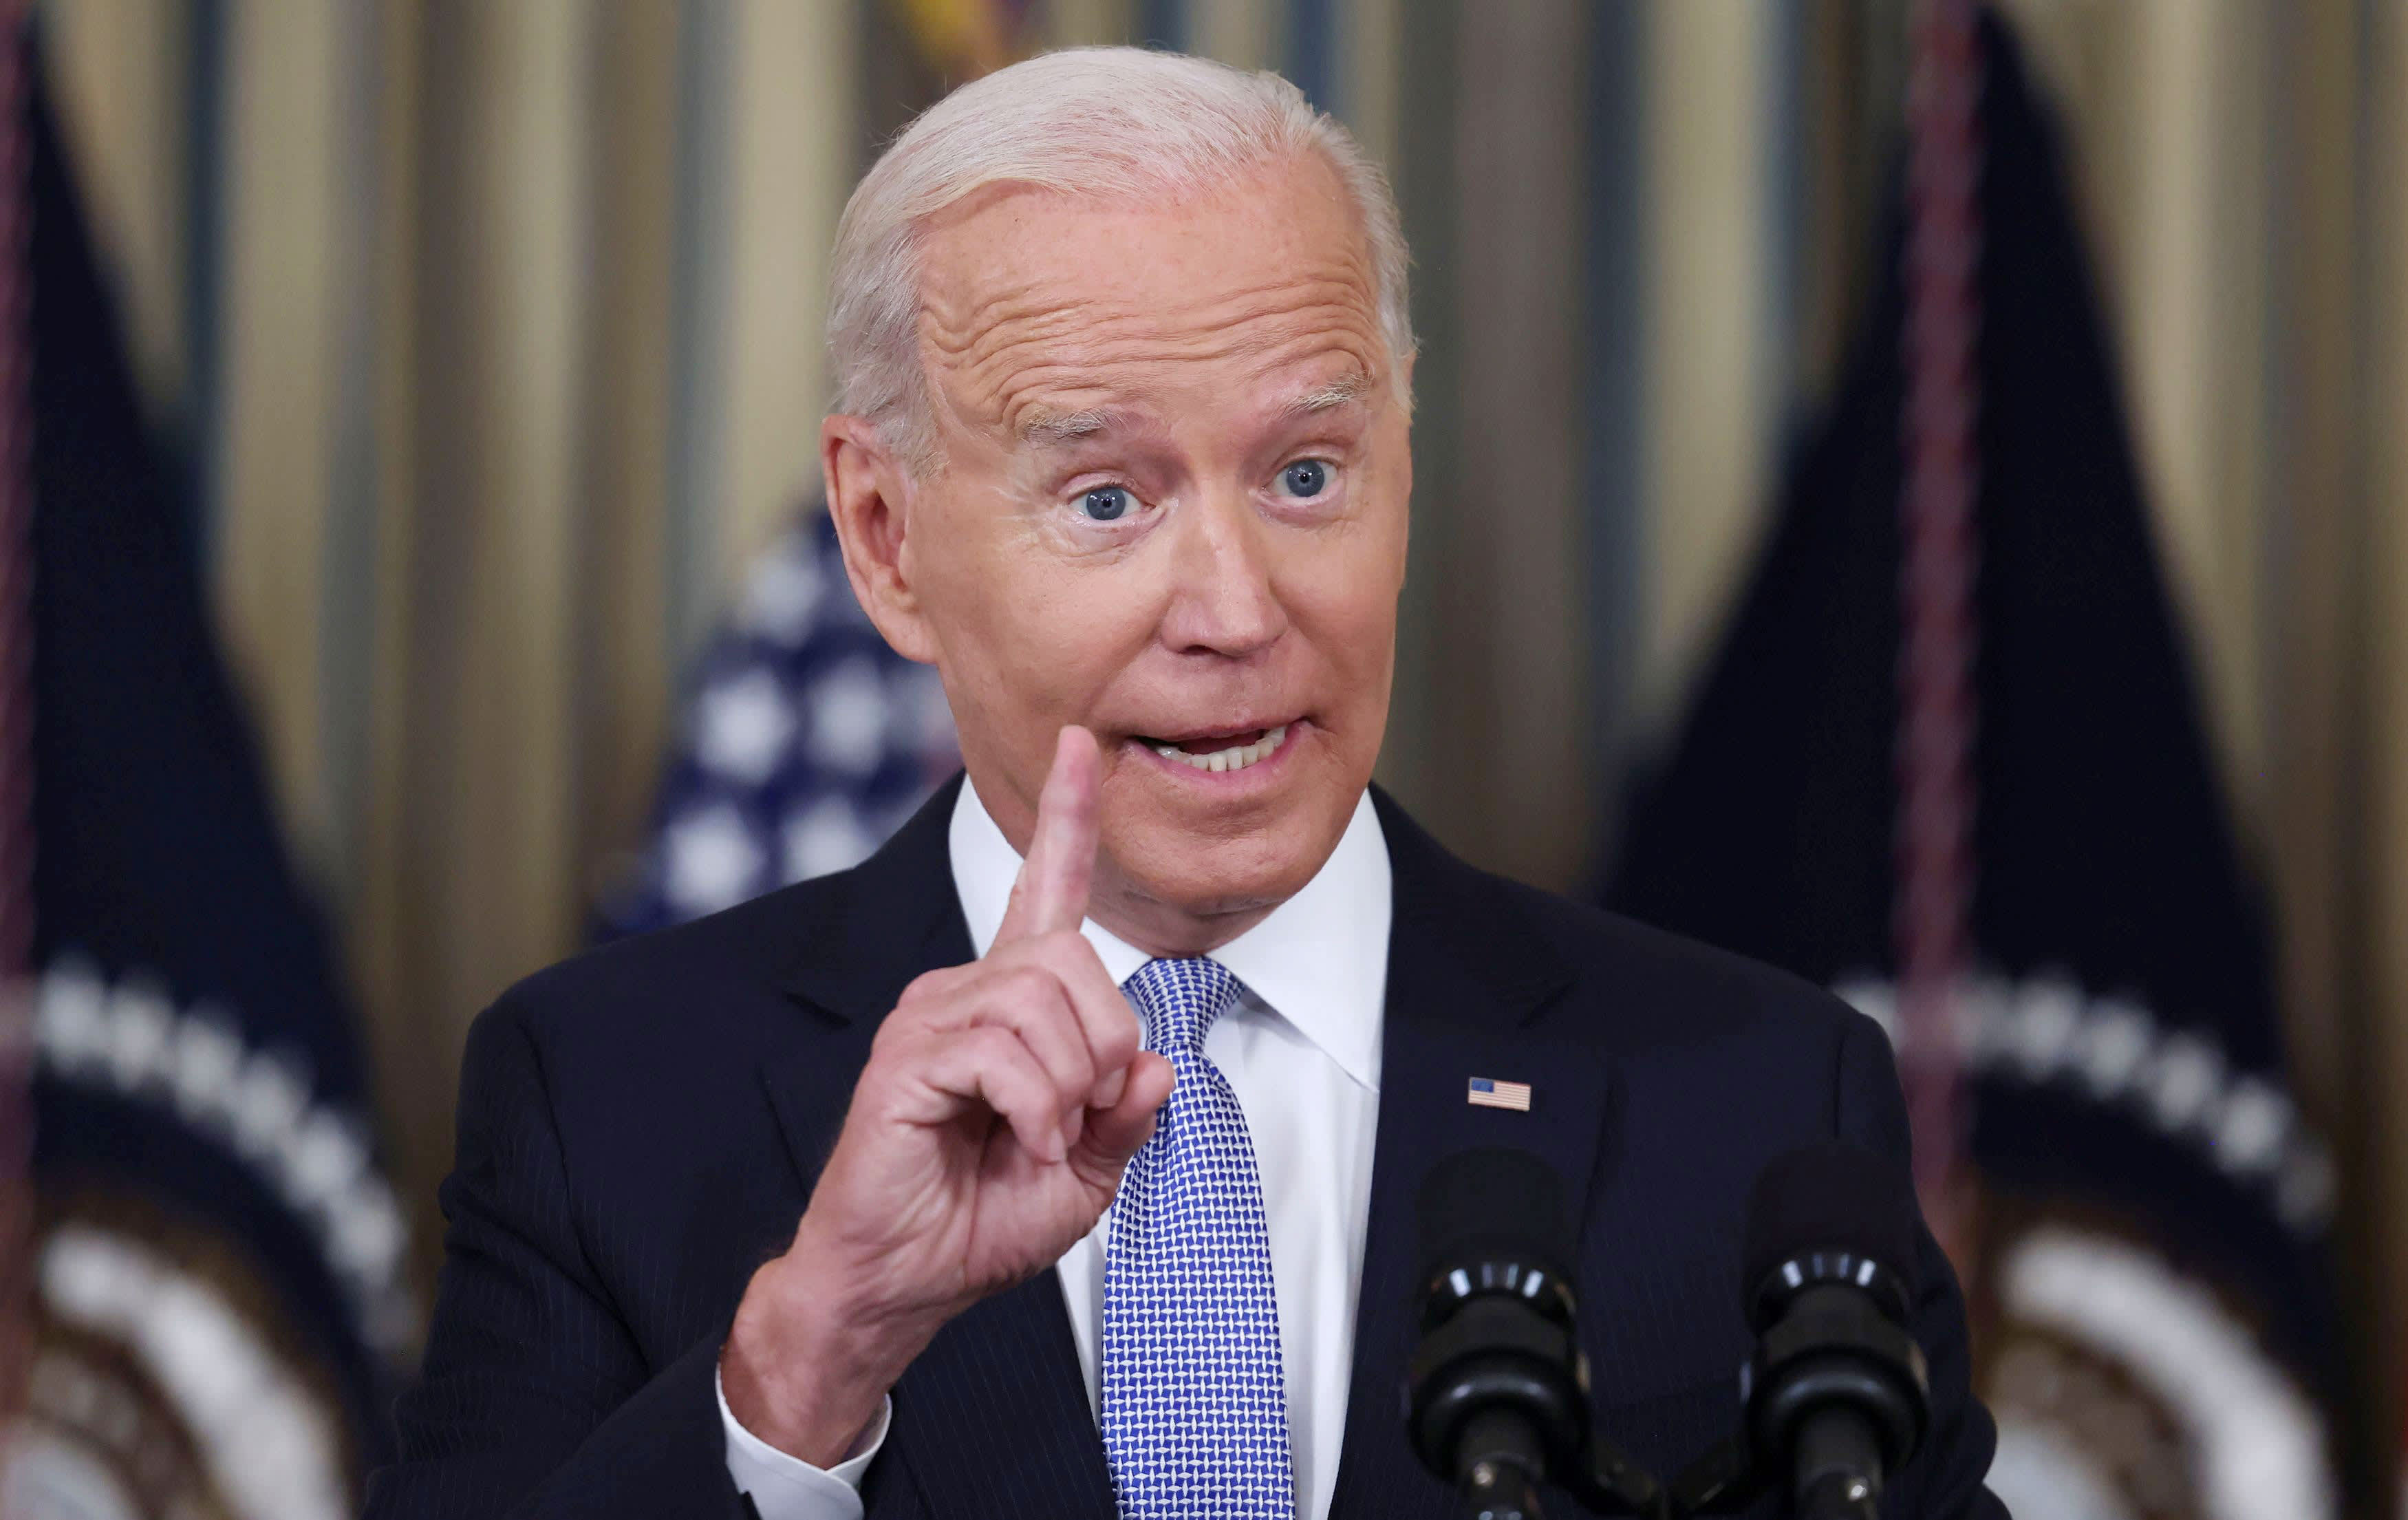 Biden says unvaccinated Americans are 'costing all of us' as he presses Covid vaccine mandates